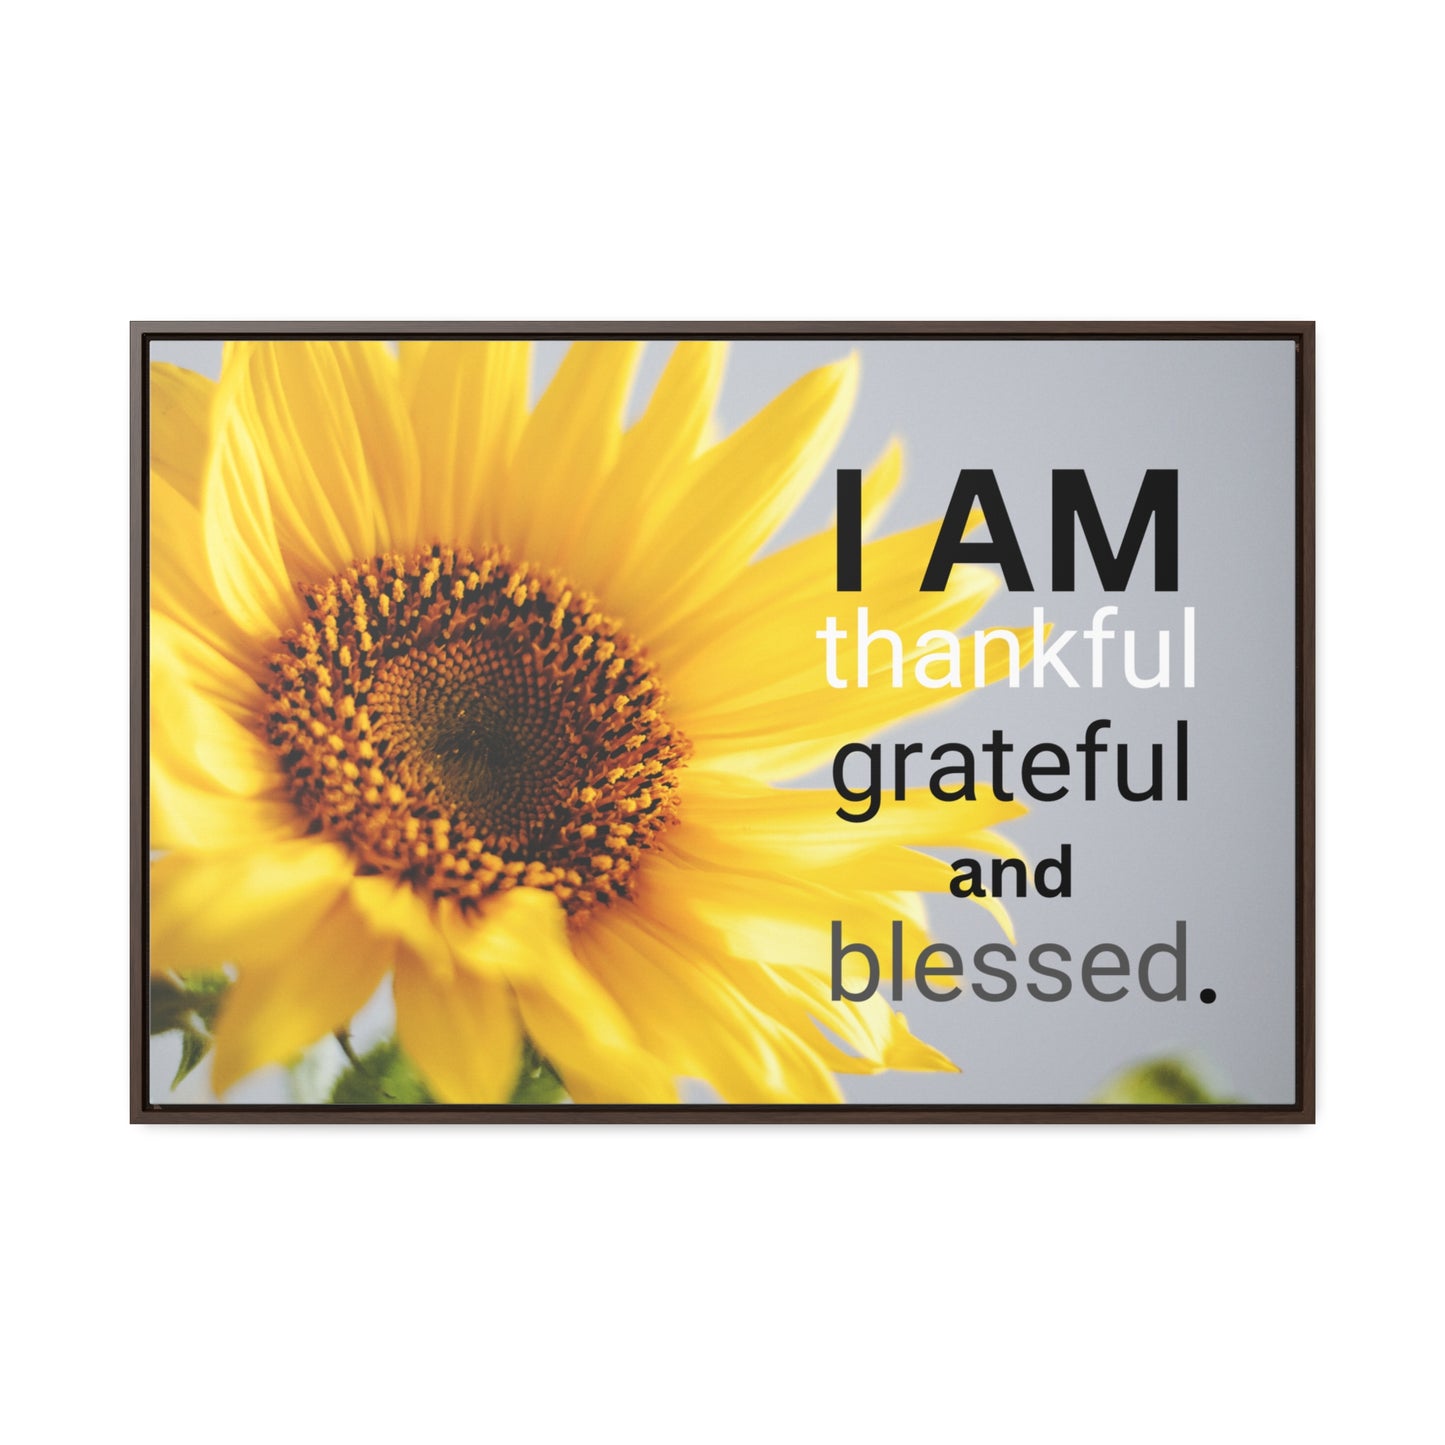 Christian Wall Art: I am Thankful, Grateful and Blessed (Floating Frame)